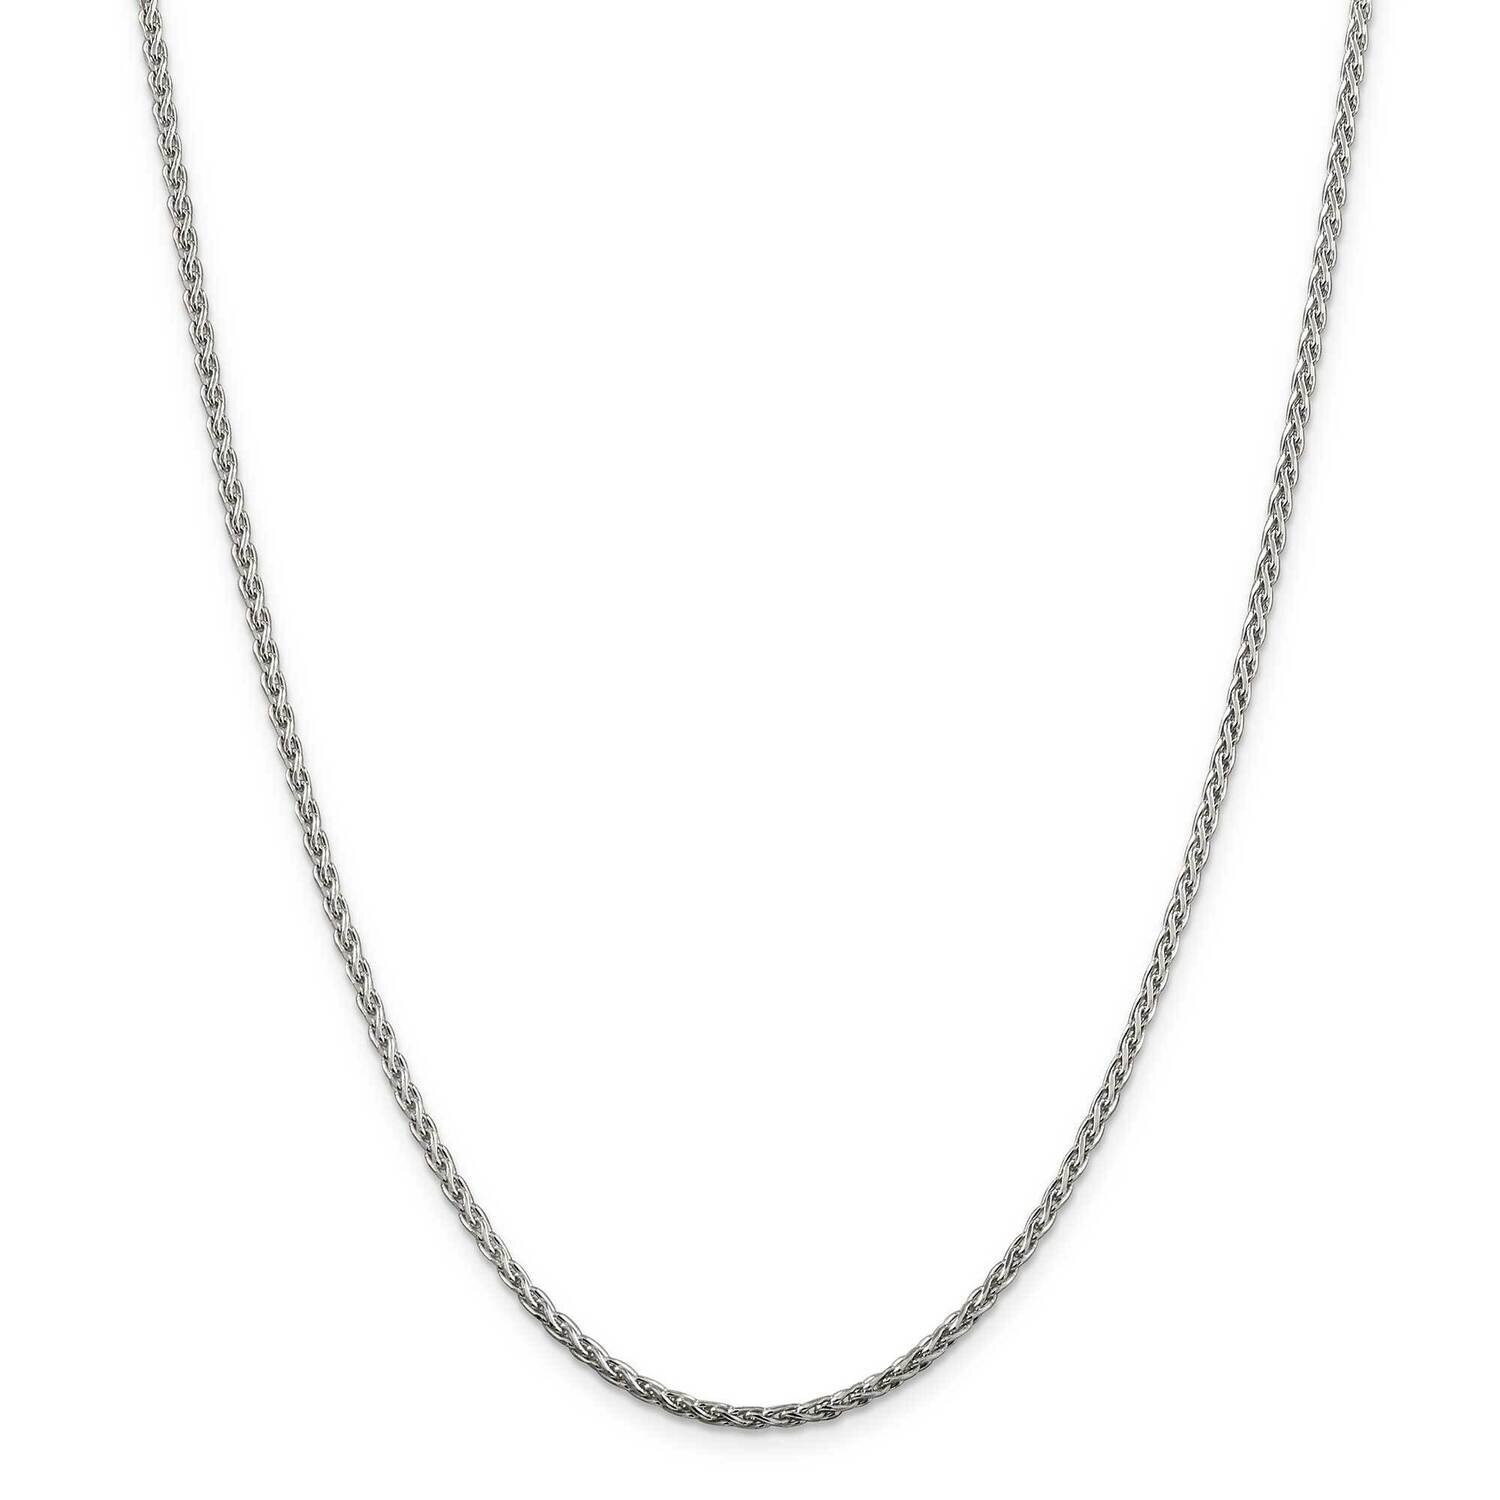 2mm Diamond-Cut Spiga Chain with 2 Inch Extender 18 Inch Sterling Silver QDS060E-18